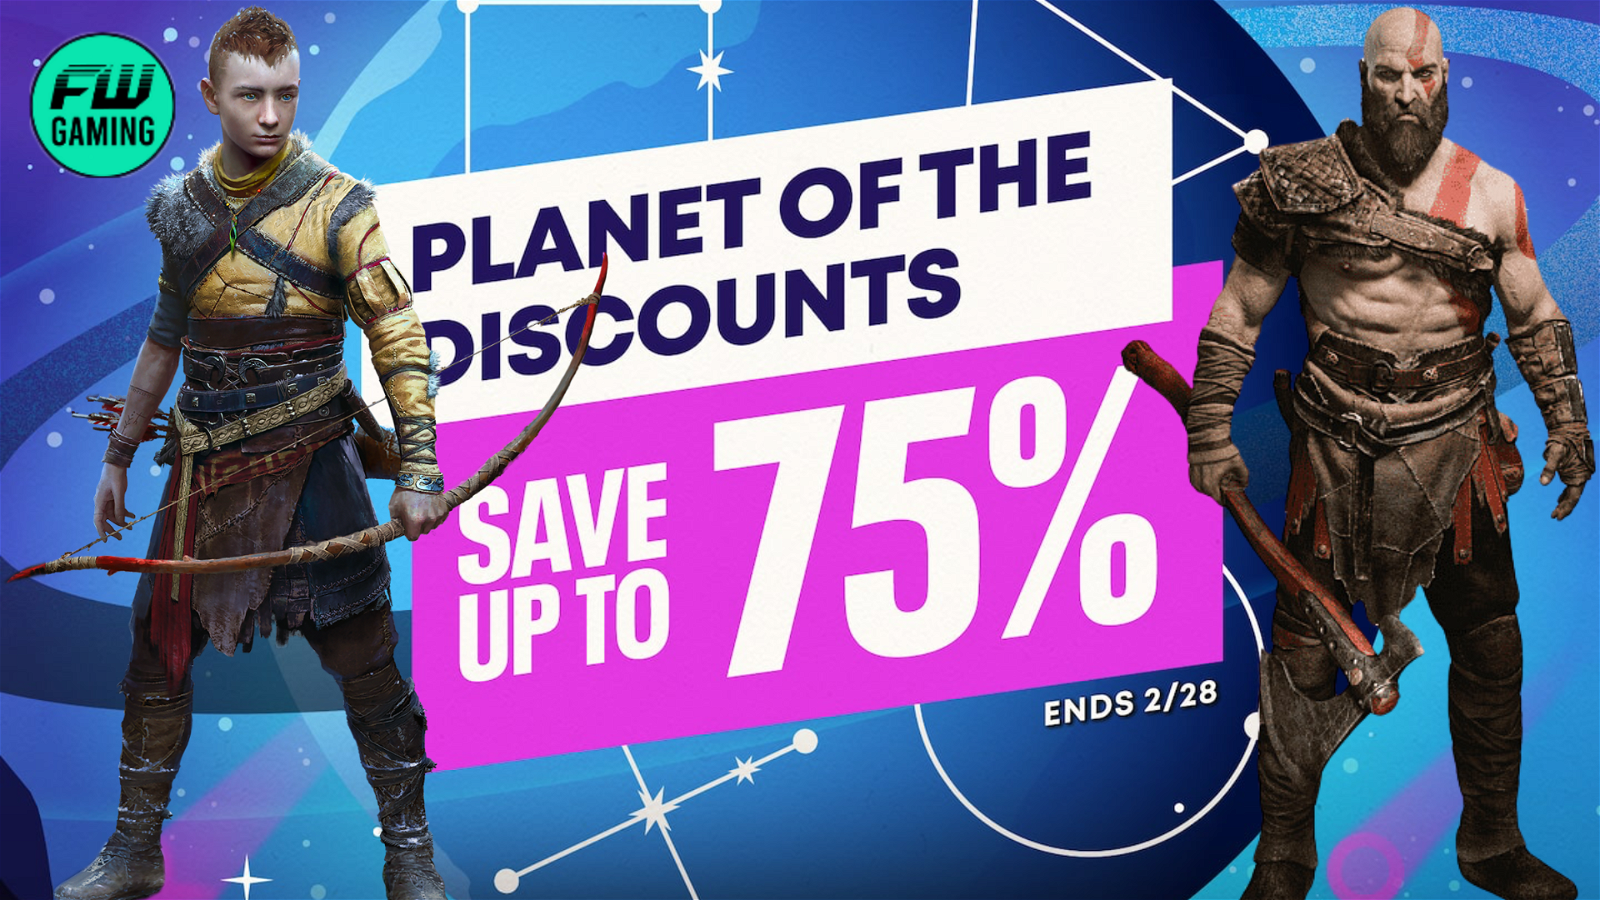 With the Incredible Planet of the Discounts Sale From PlayStation, There Hasn’t Been a Better or Cheaper Time to Grab God of War Ragnarok